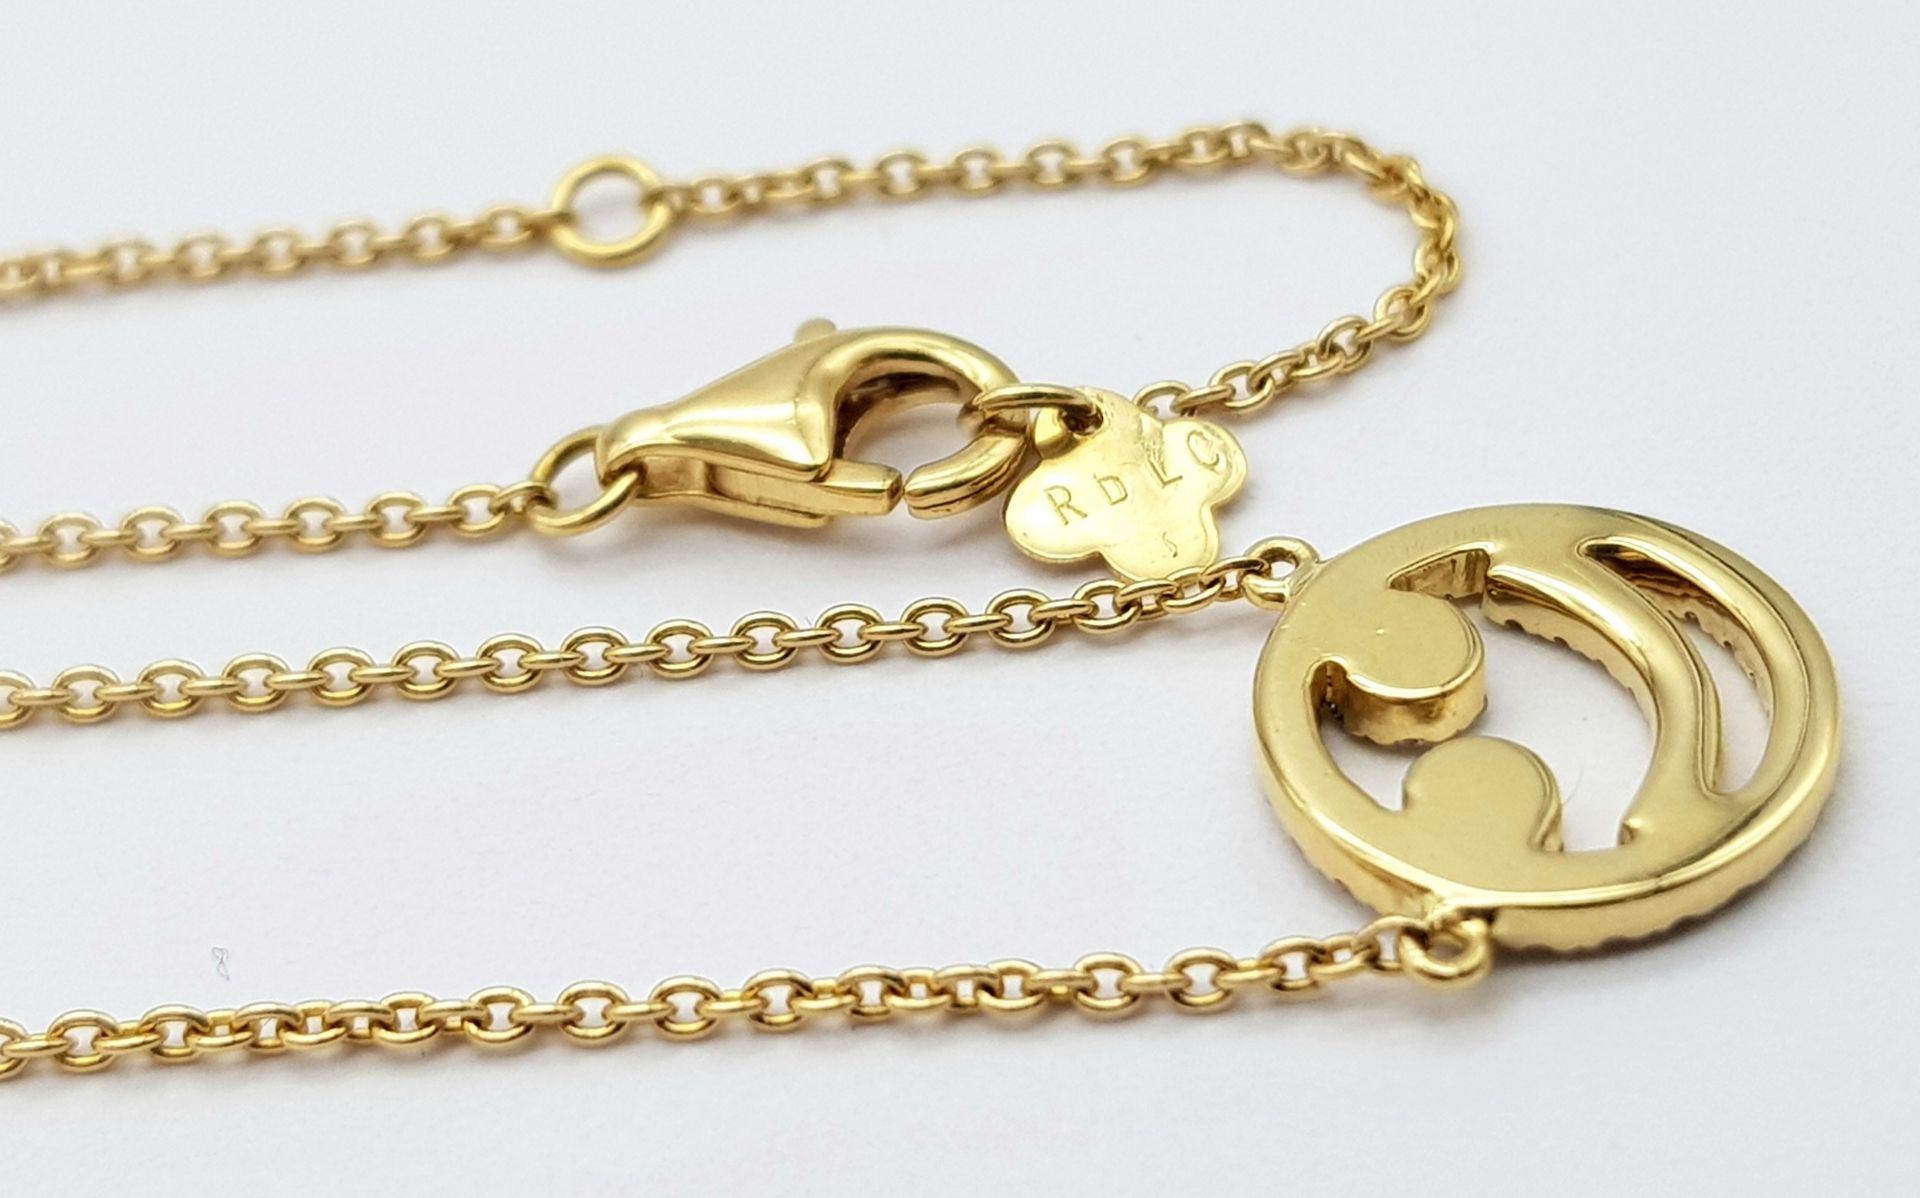 An 18K Gold Diamond Smiley Face Pendant on an 18K Yellow Gold Disappearing Necklace. 1cm diameter - Image 3 of 7